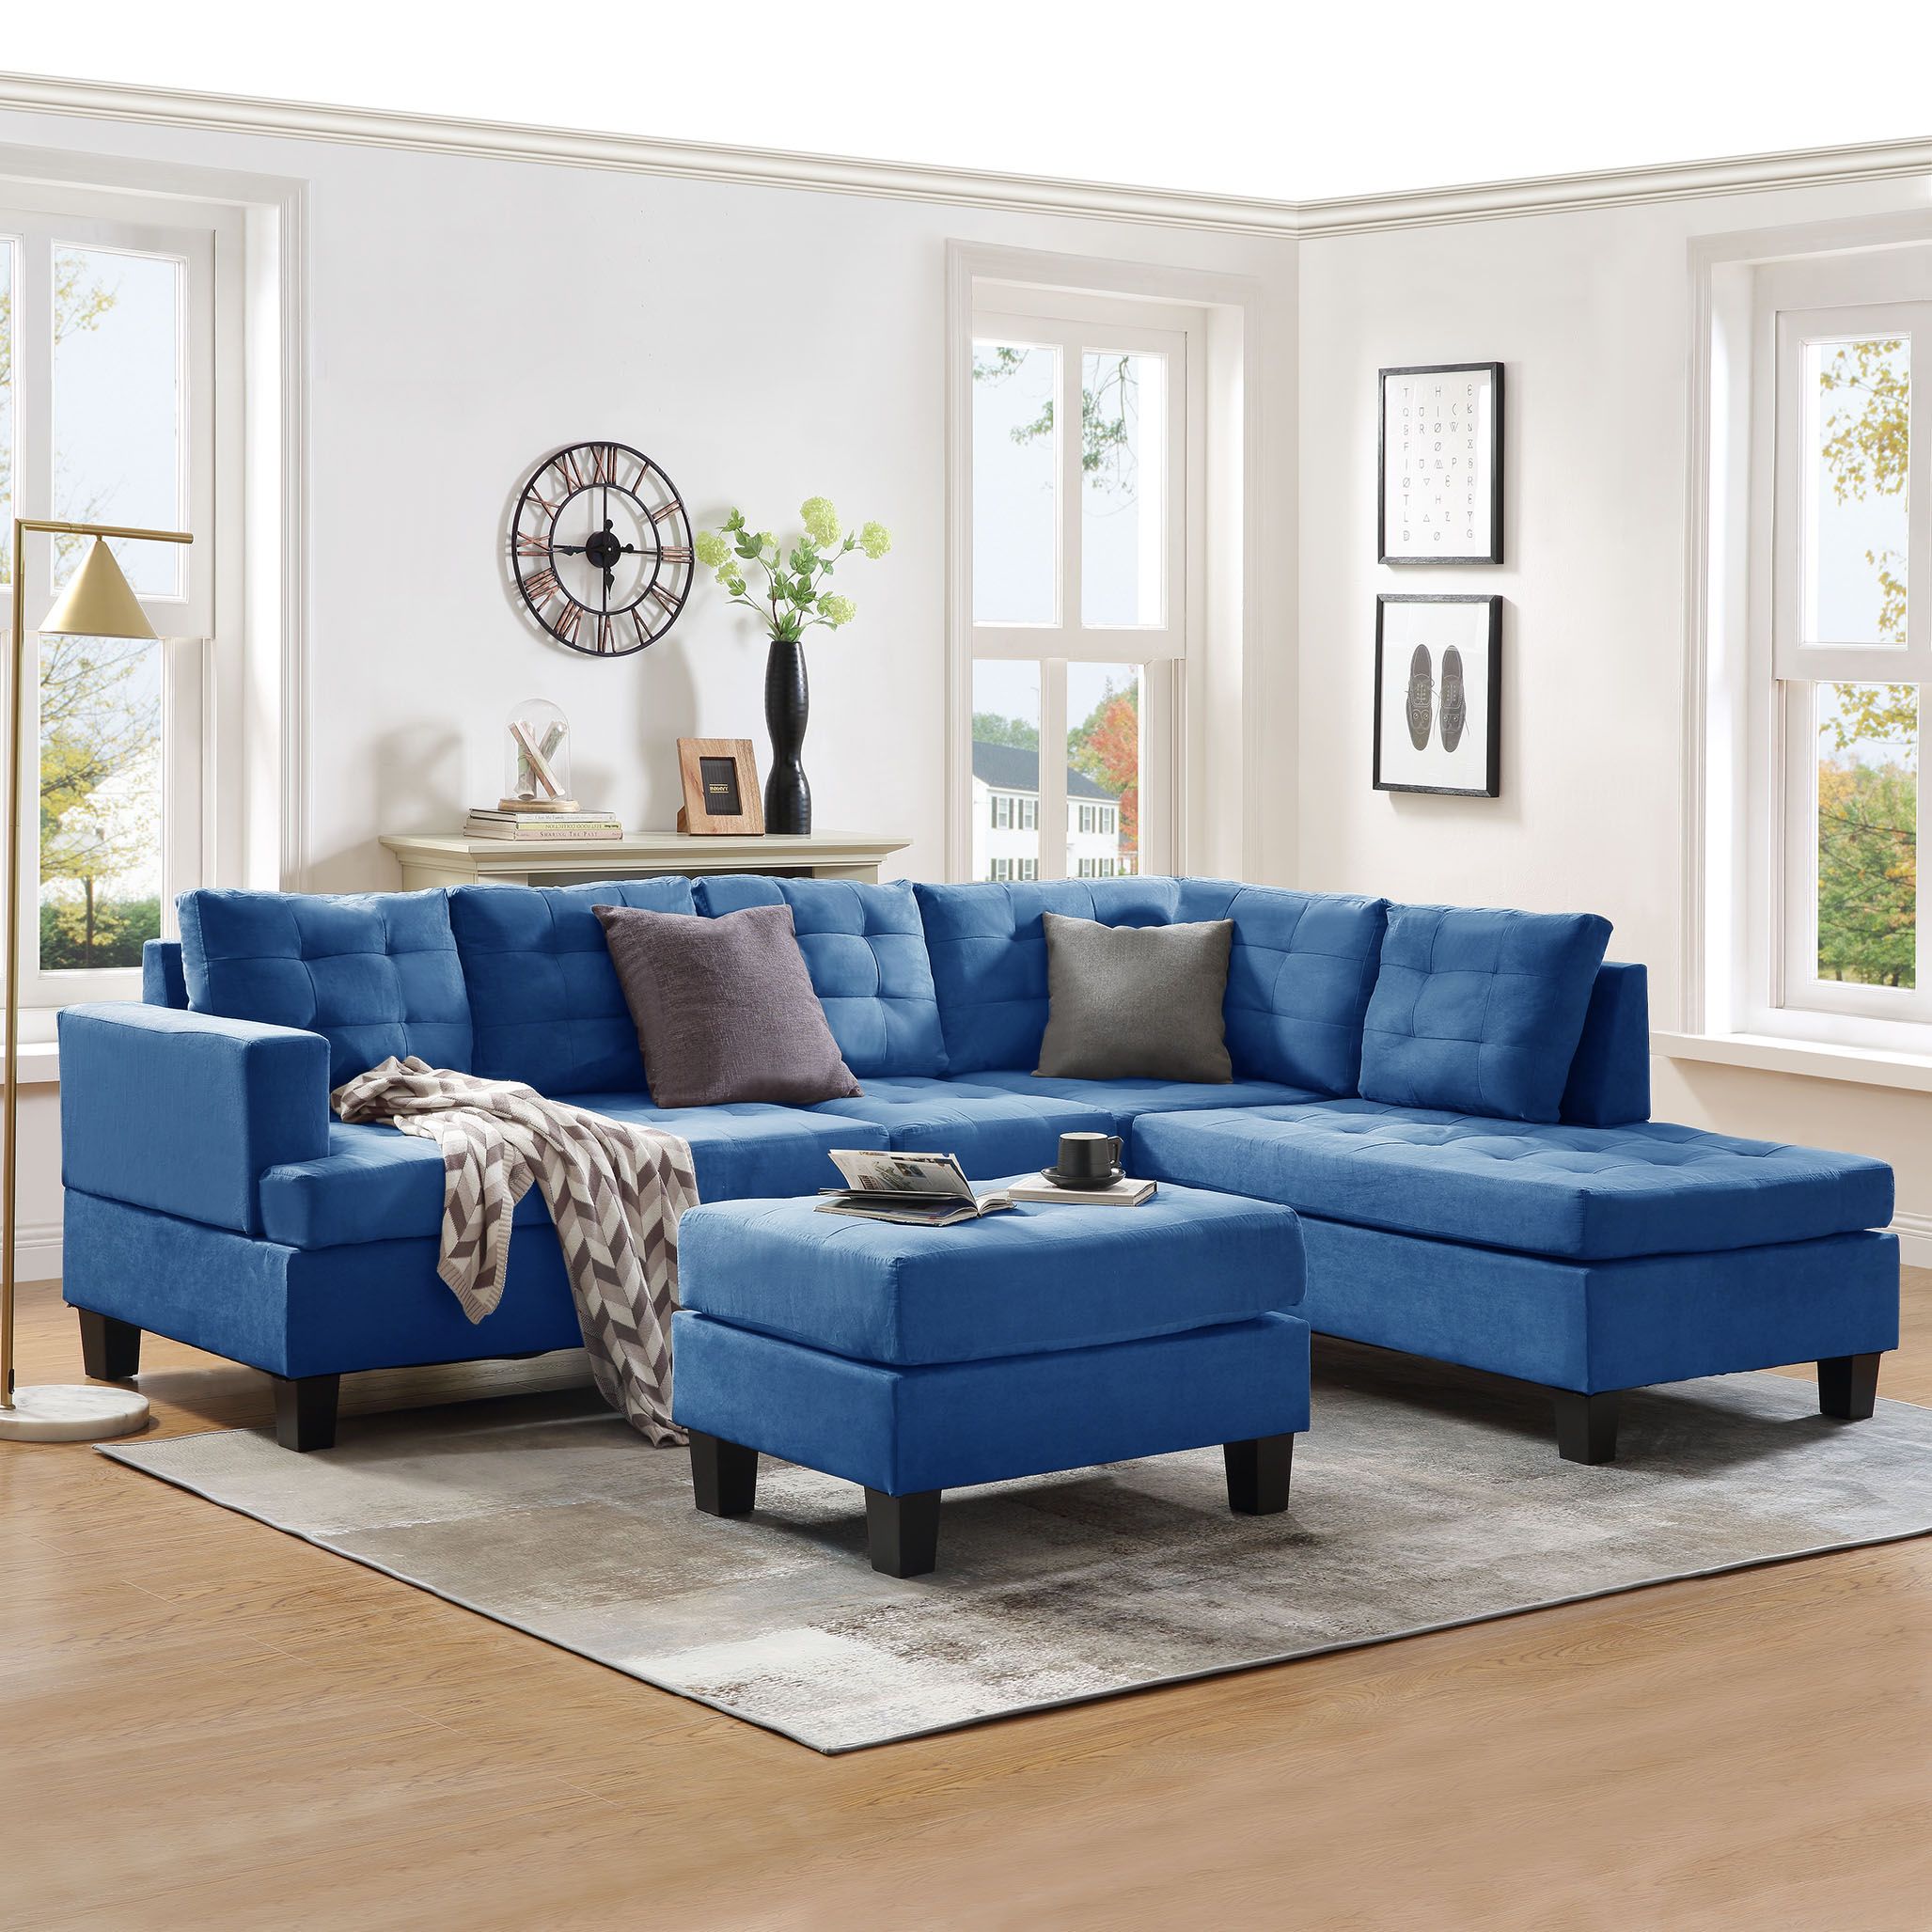 Urhomepro L Shape Mid Century Sofa, 105"w Modern Sectional Sofa With Pertaining To Blue Fabric Lounge Chair And Ottomans Set (View 6 of 20)